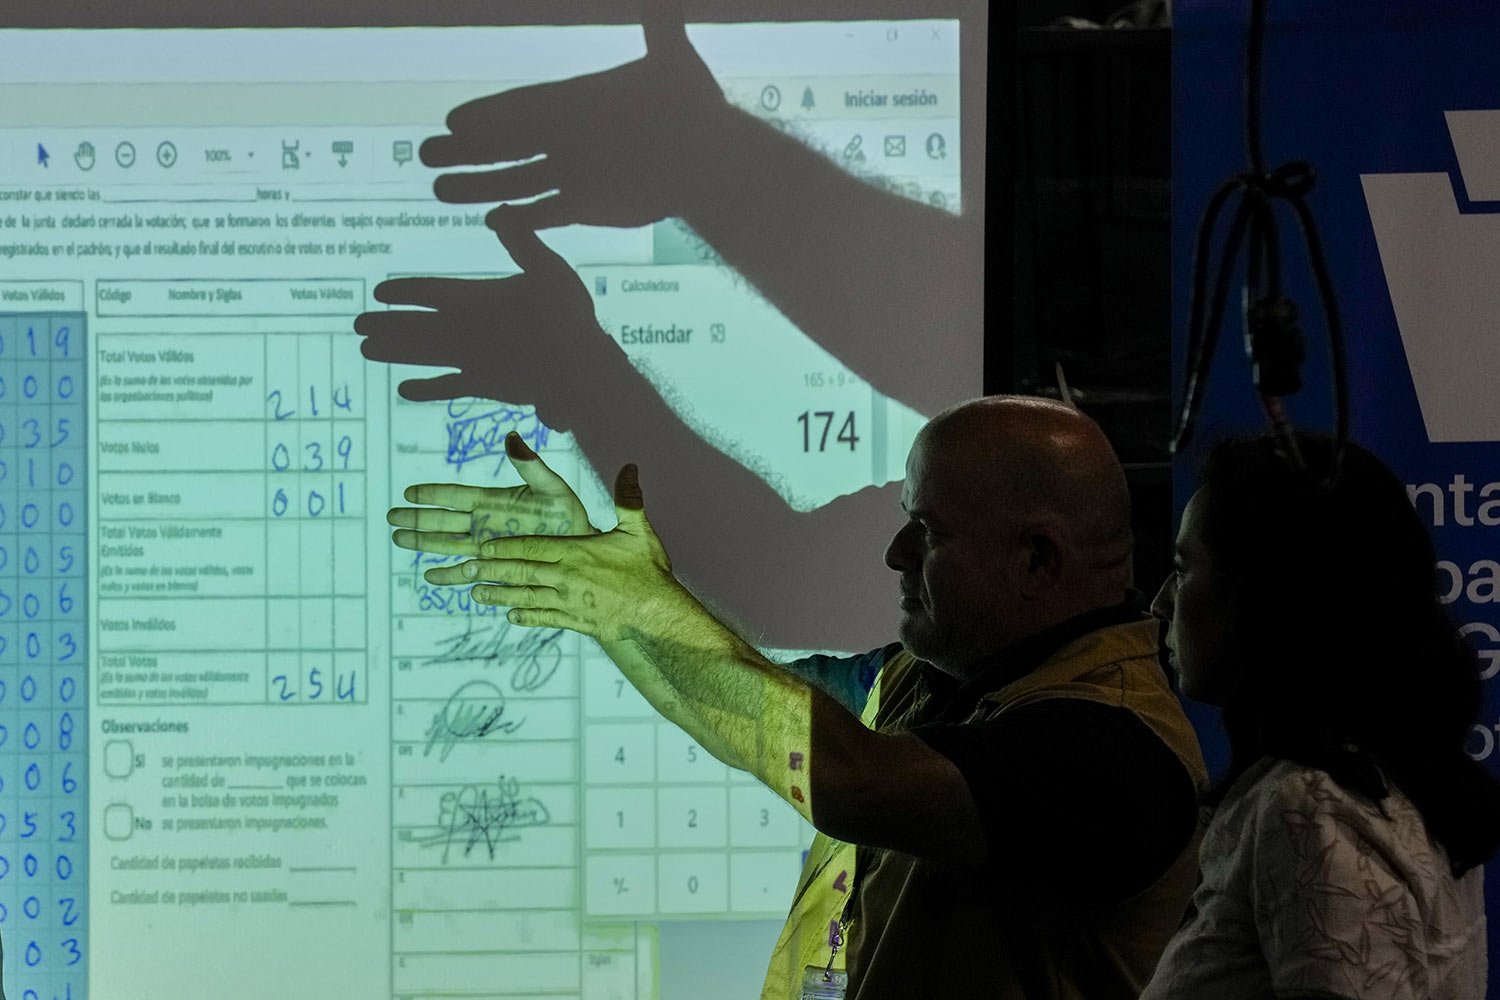  Electoral authorities review electoral records projected on a screen, on the third day of a review of electoral records, in Guatemala City, Thursday, July 6, 2023. The Constitutional Court ordered the investigation of alleged irregularities claimed 